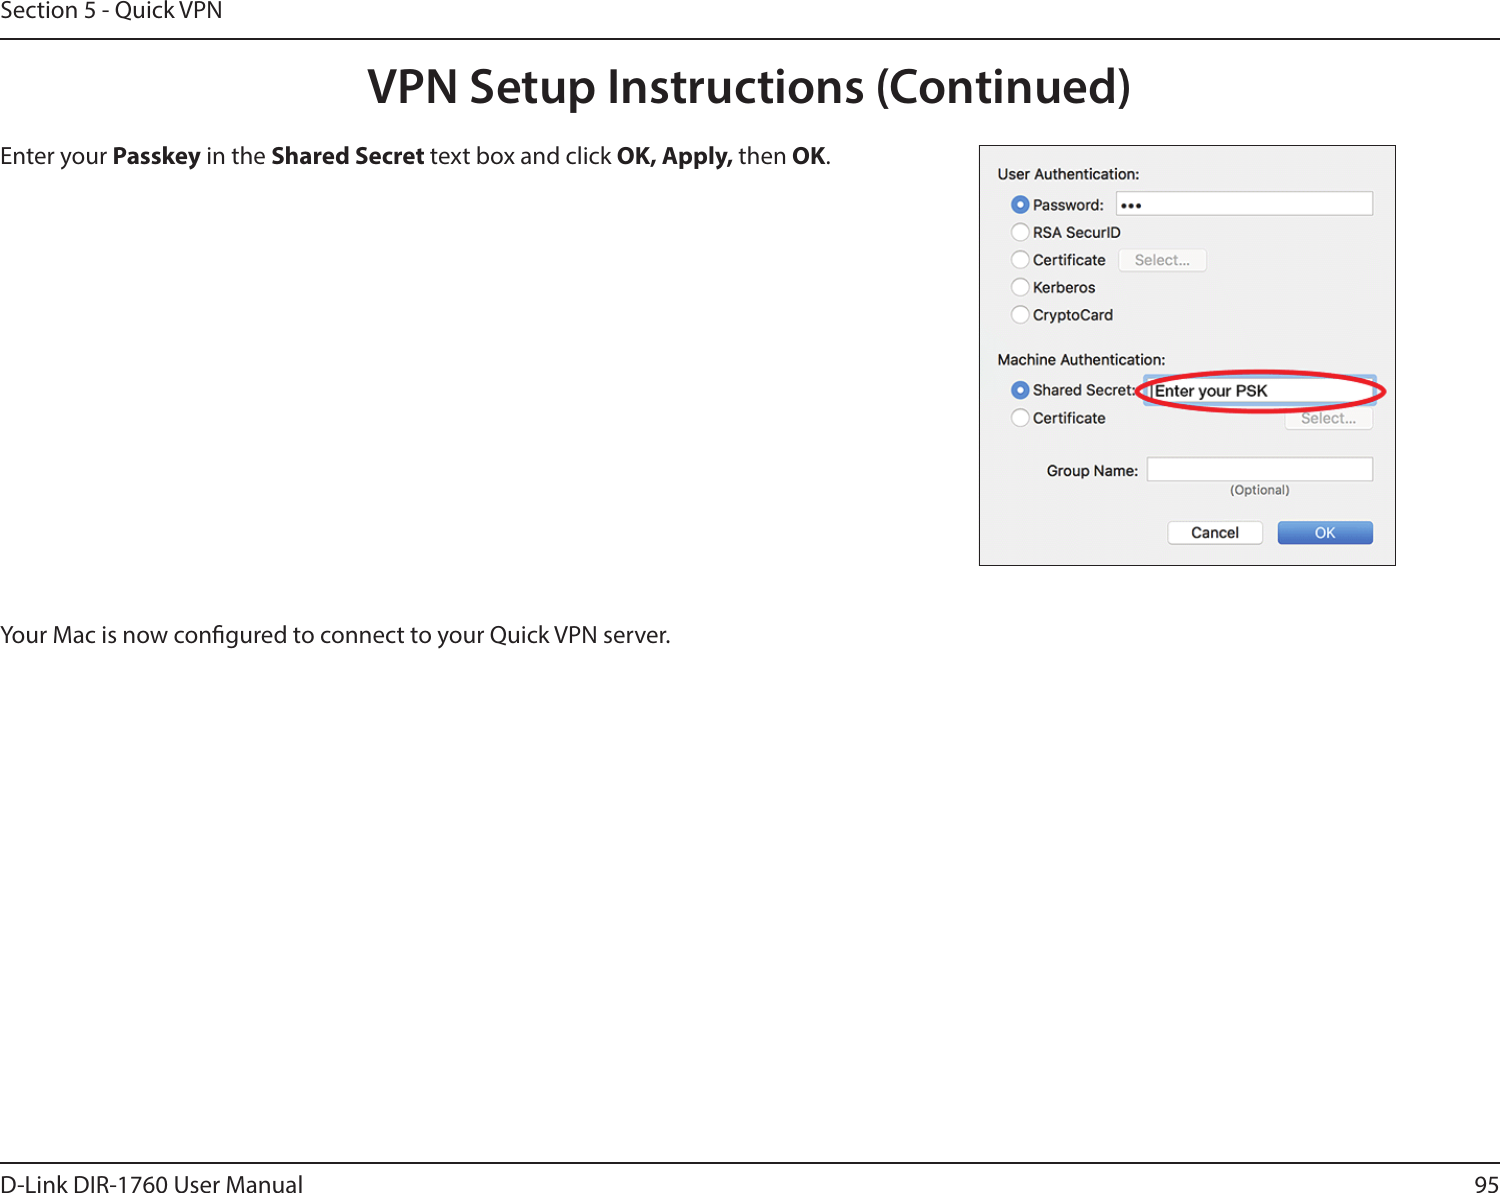 95D-Link DIR-1760 User ManualSection 5 - Quick VPNEnter your Passkey in the Shared Secret text box and click OK, Apply, then OK.Your Mac is now congured to connect to your Quick VPN server.VPN Setup Instructions (Continued)